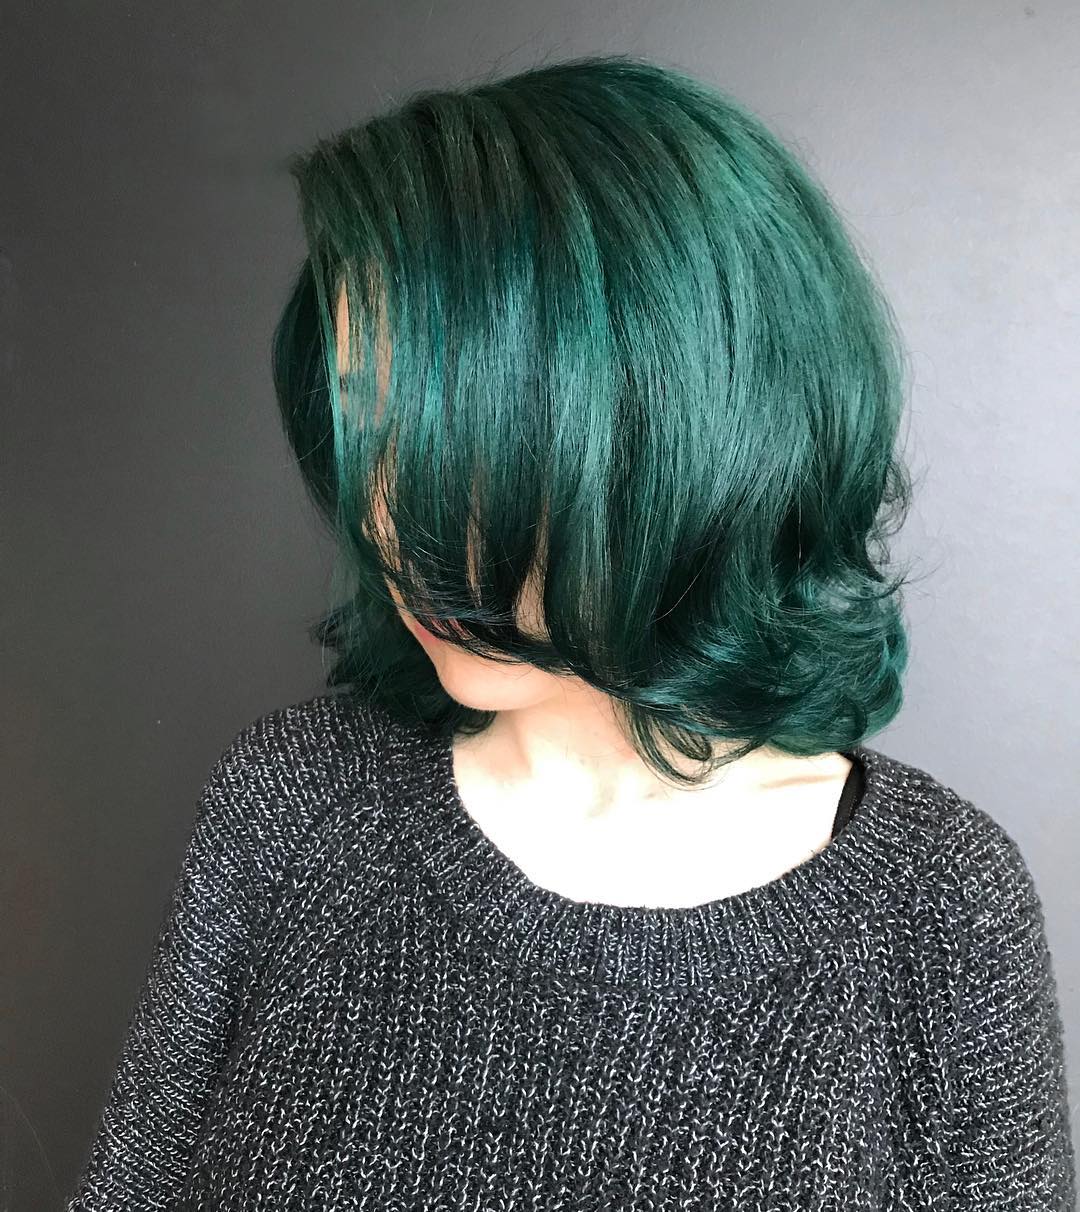 Hair color in a rich forest green shade